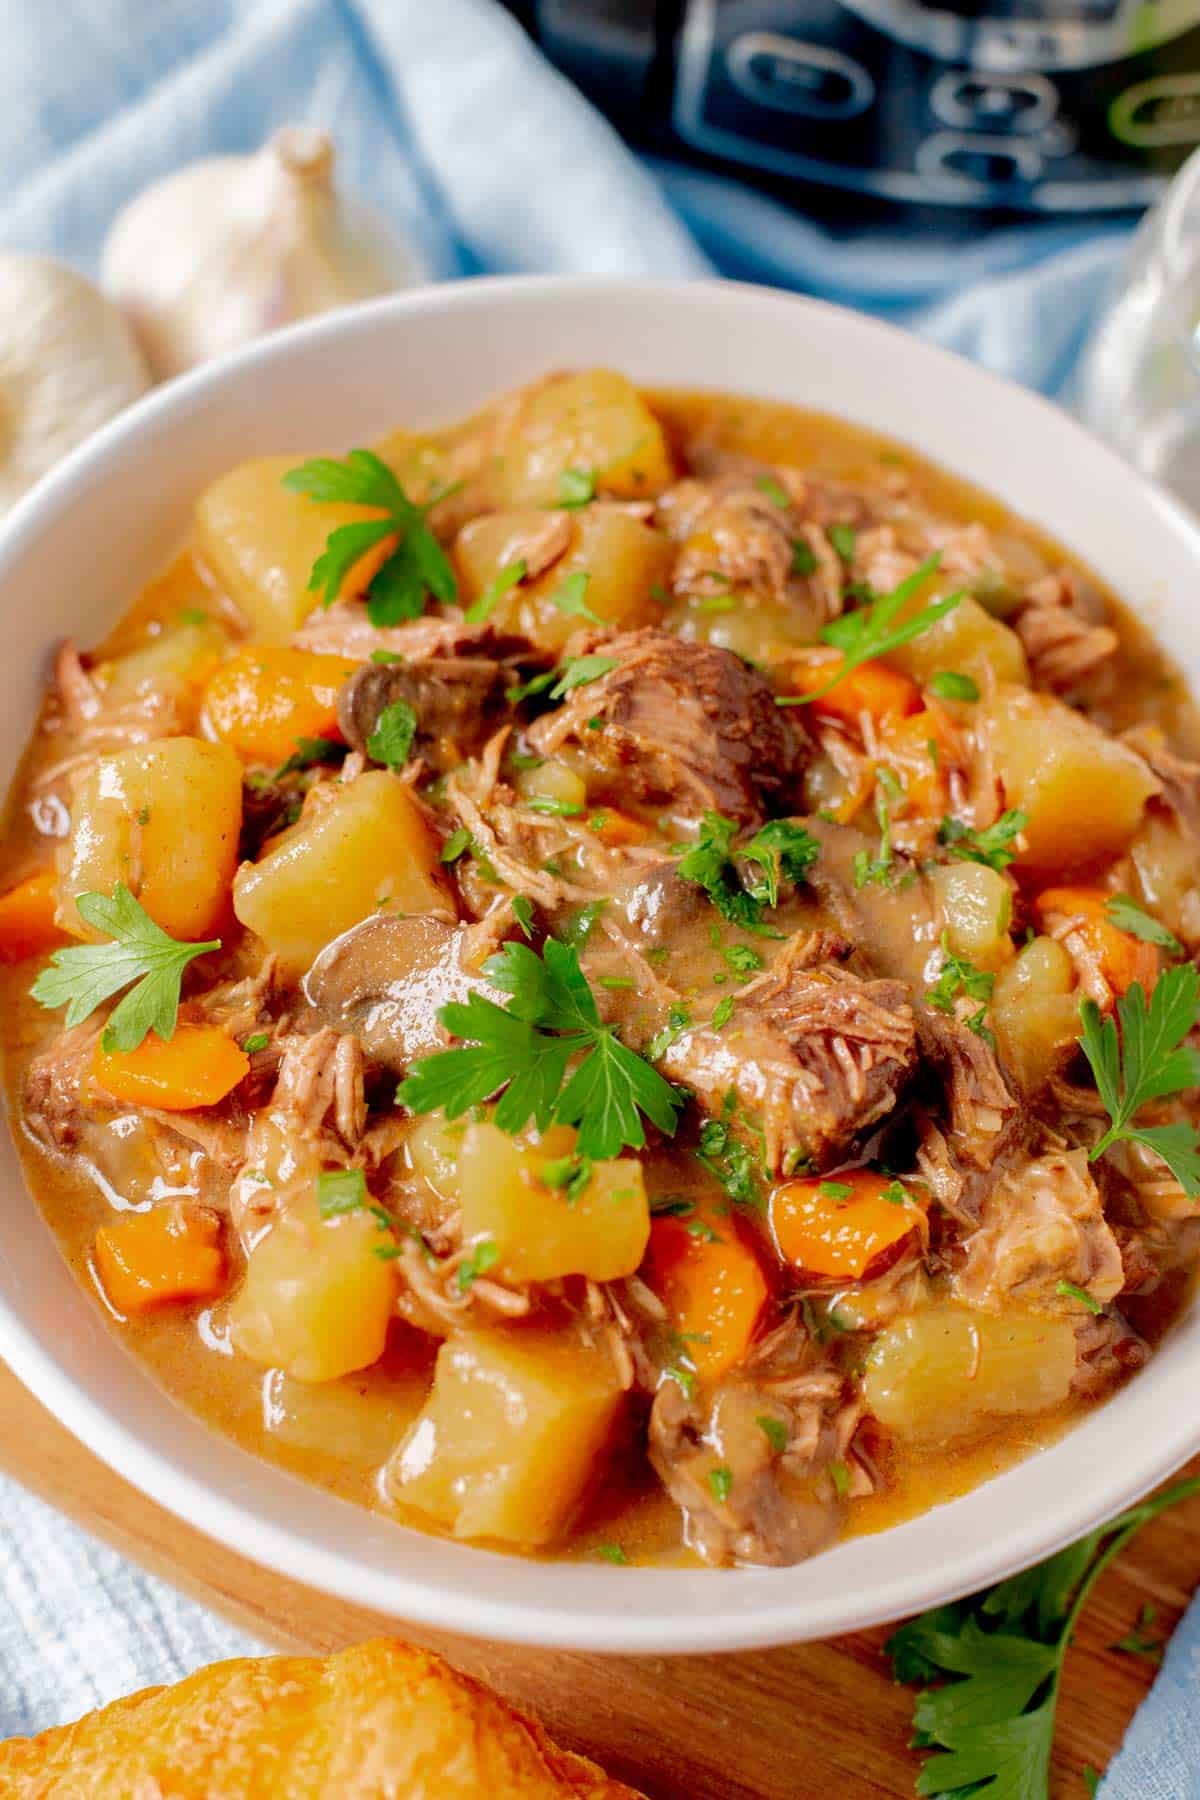 slow cooker beef stew with mushrooms is erved in a white bowl